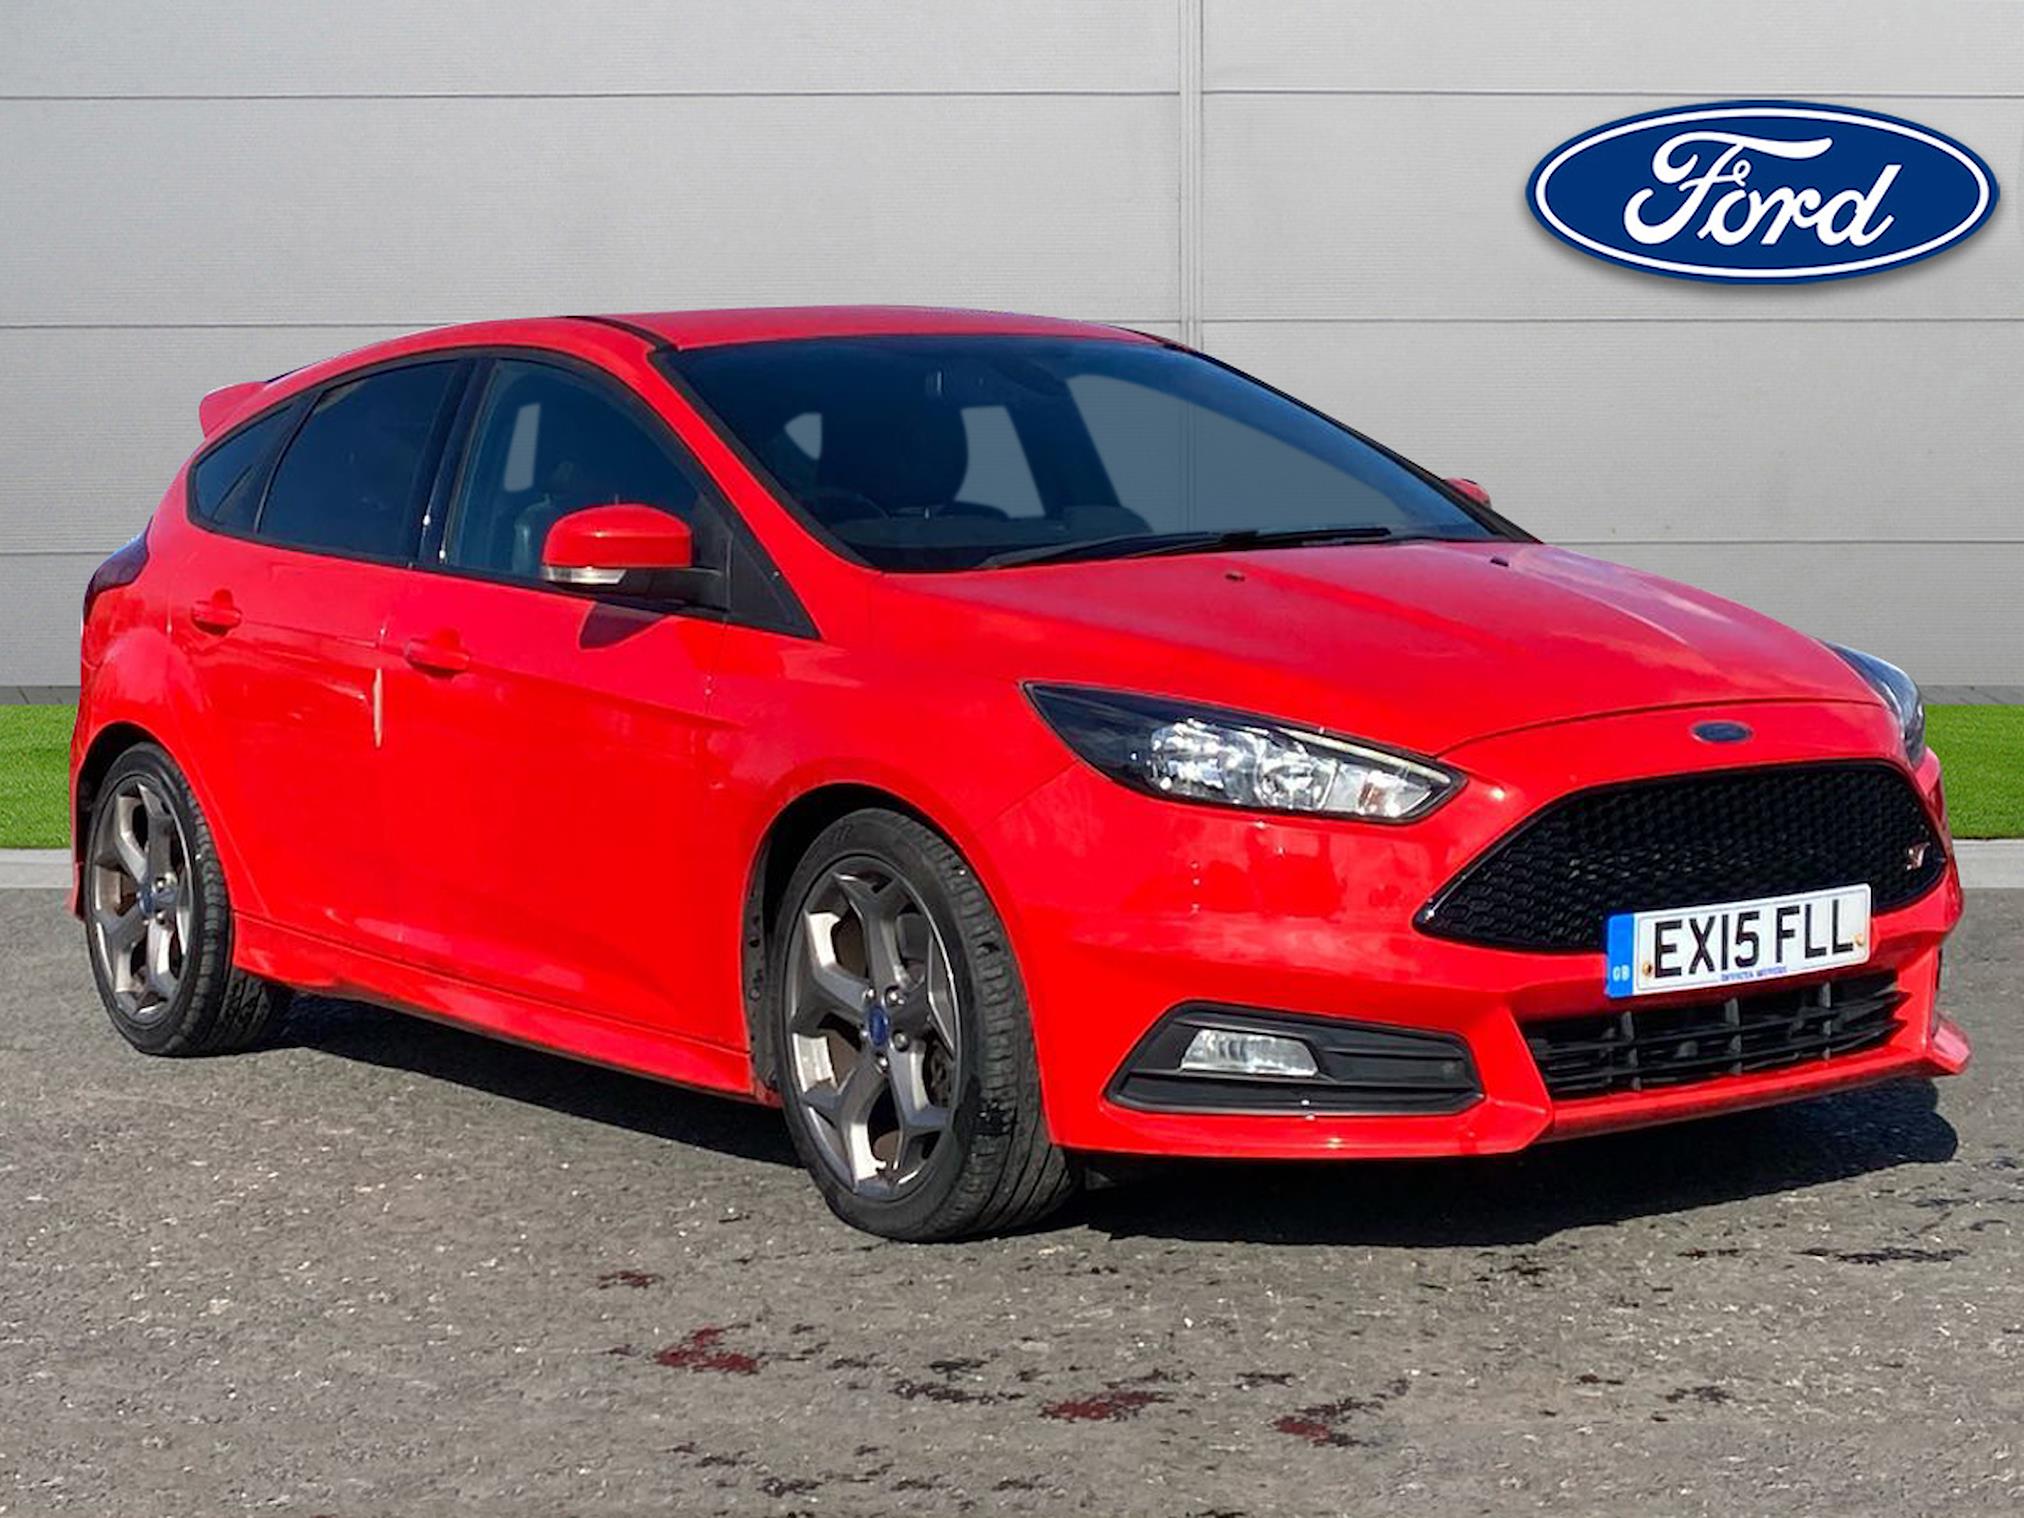 Used FORD FOCUS 2.0T Ecoboost St-2 5Dr 2015